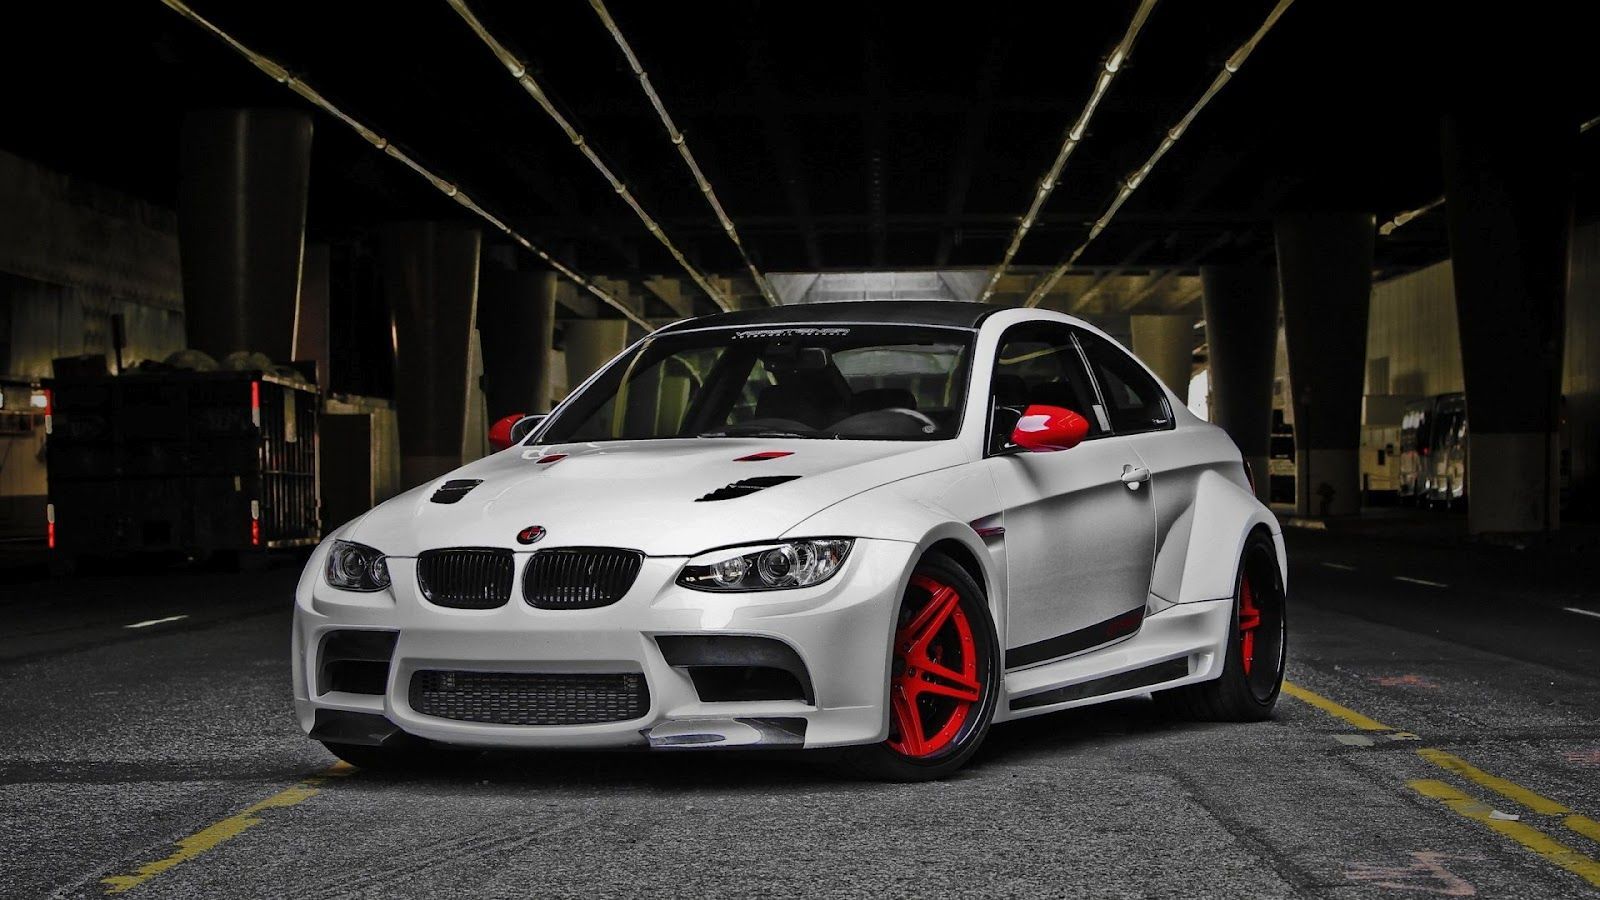 BMW M3 Series Wallpaper Full HD Pictures